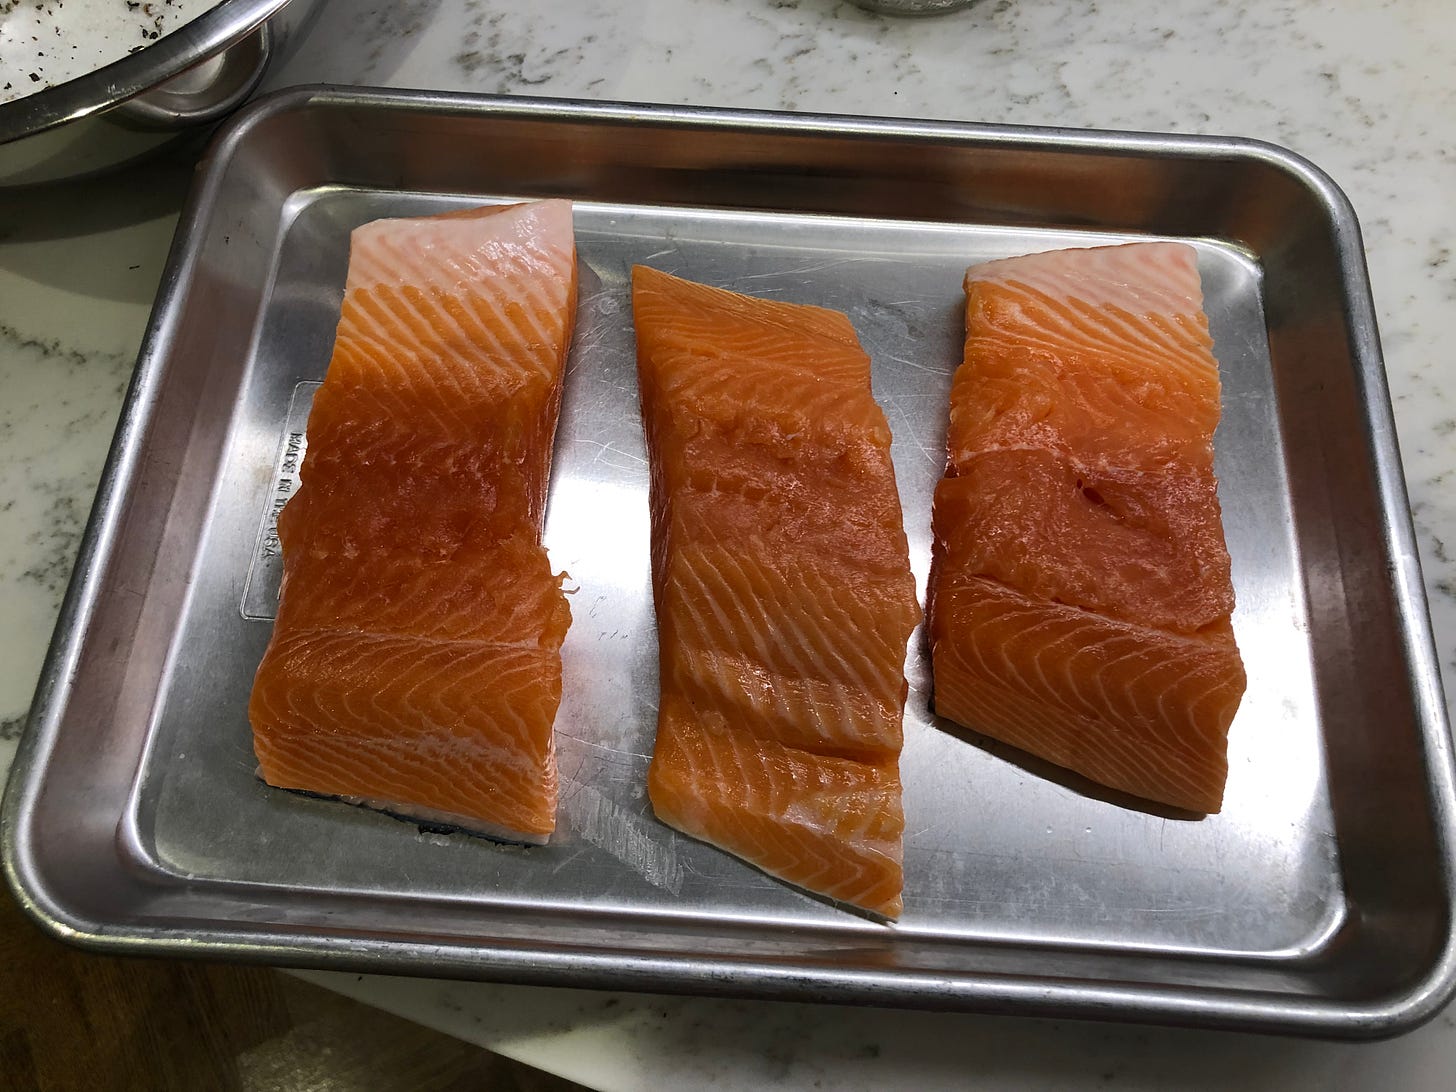 Three pieces of salmon on a metal tray